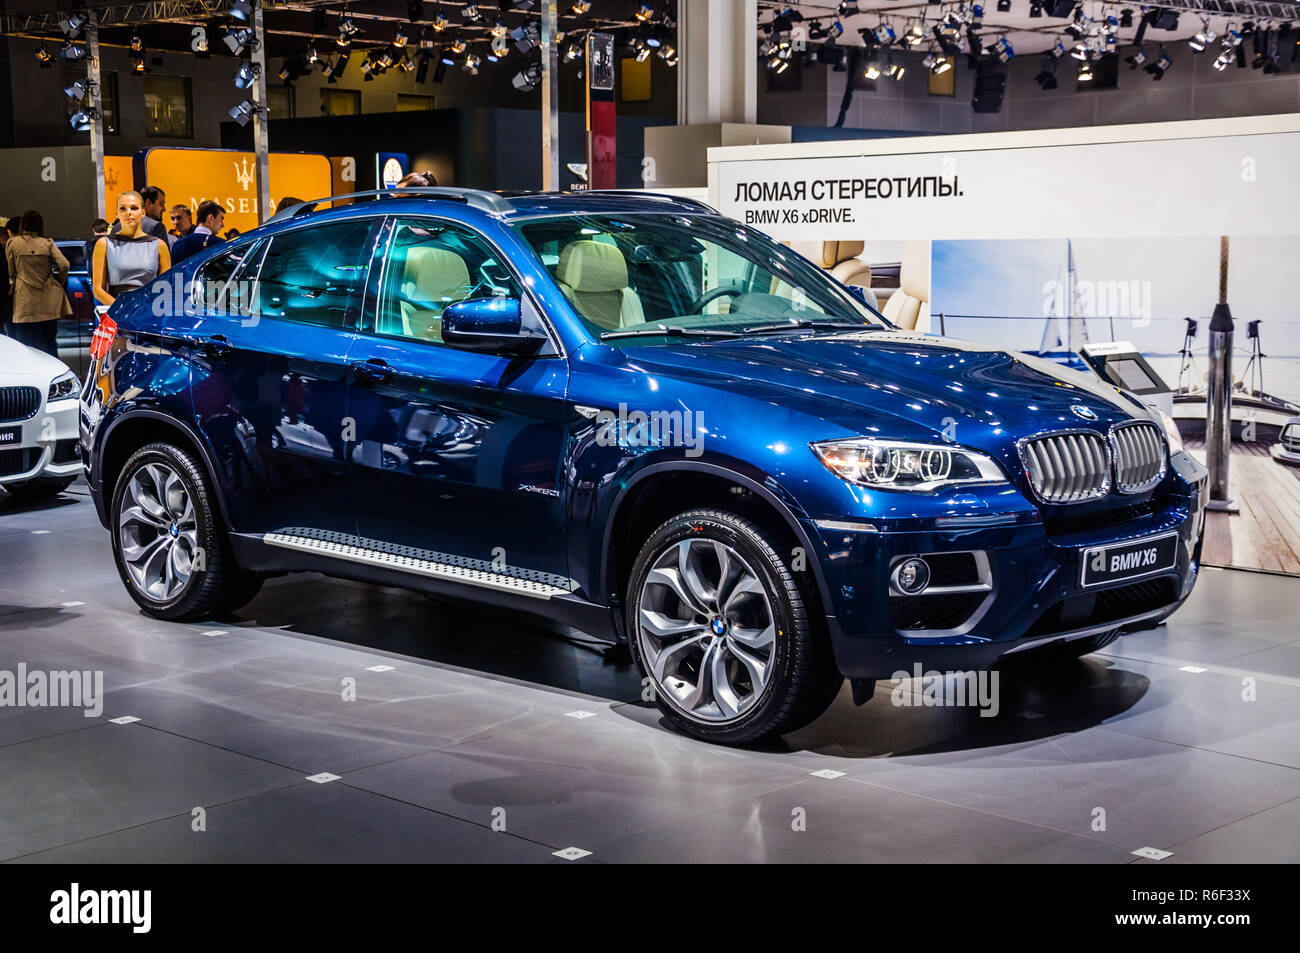 MOSCOW, RUSSIA - AUG 2012: BMW X6 E71 presented as world premiere